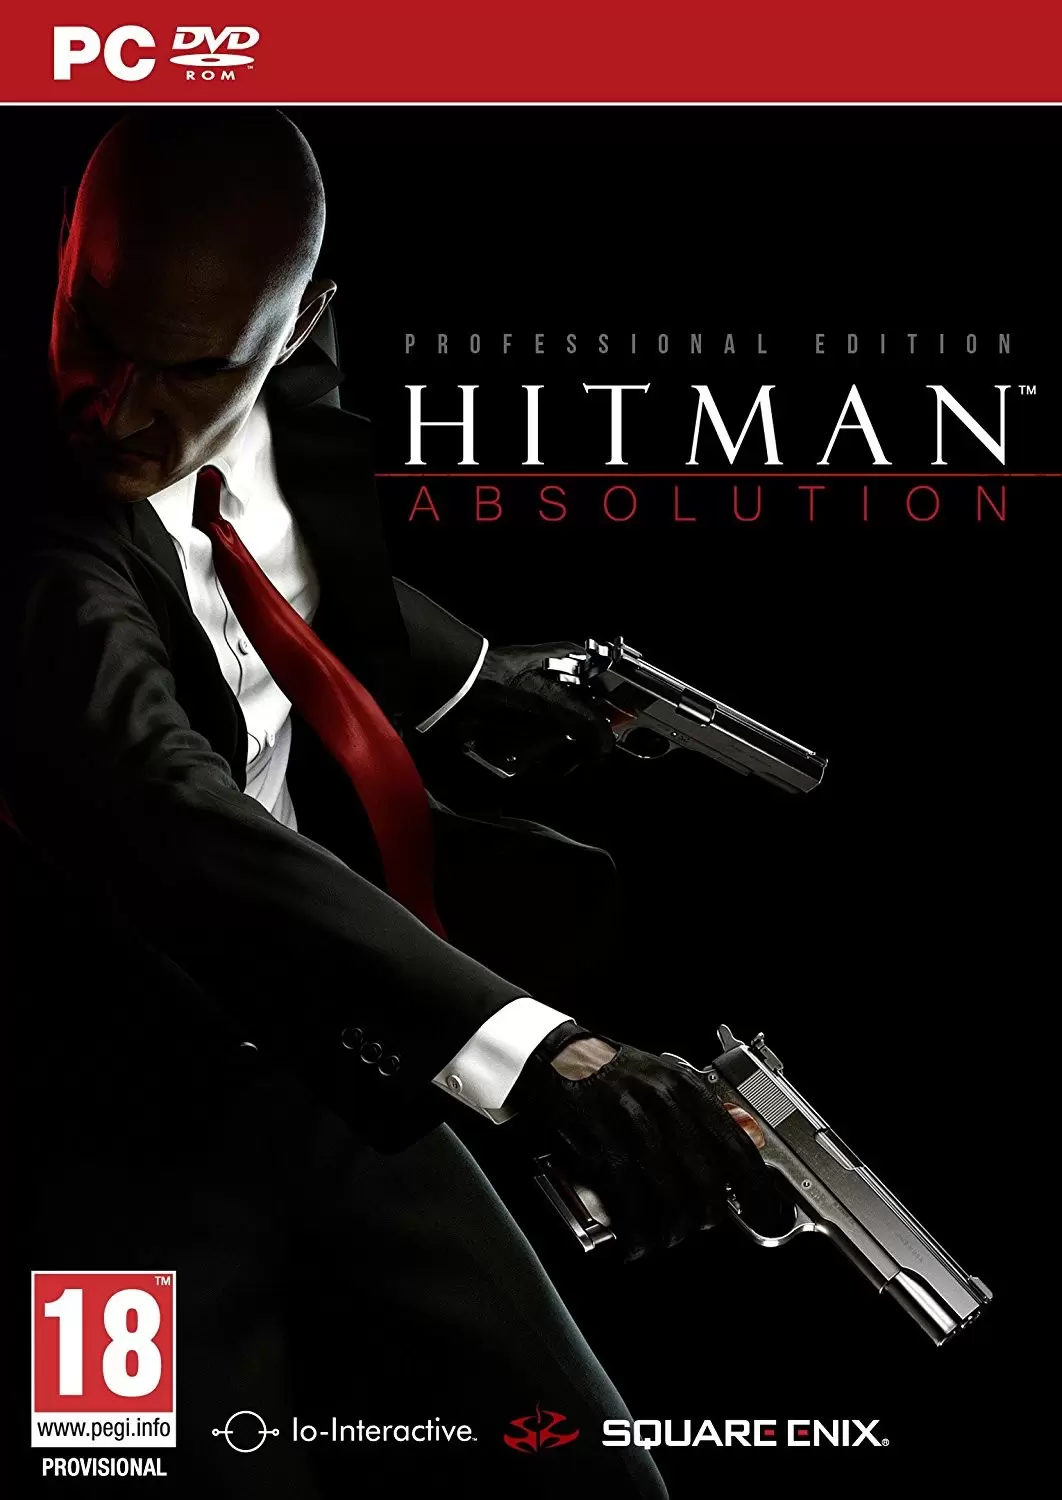 PC Games - Hitman Absolution: Professional Edition